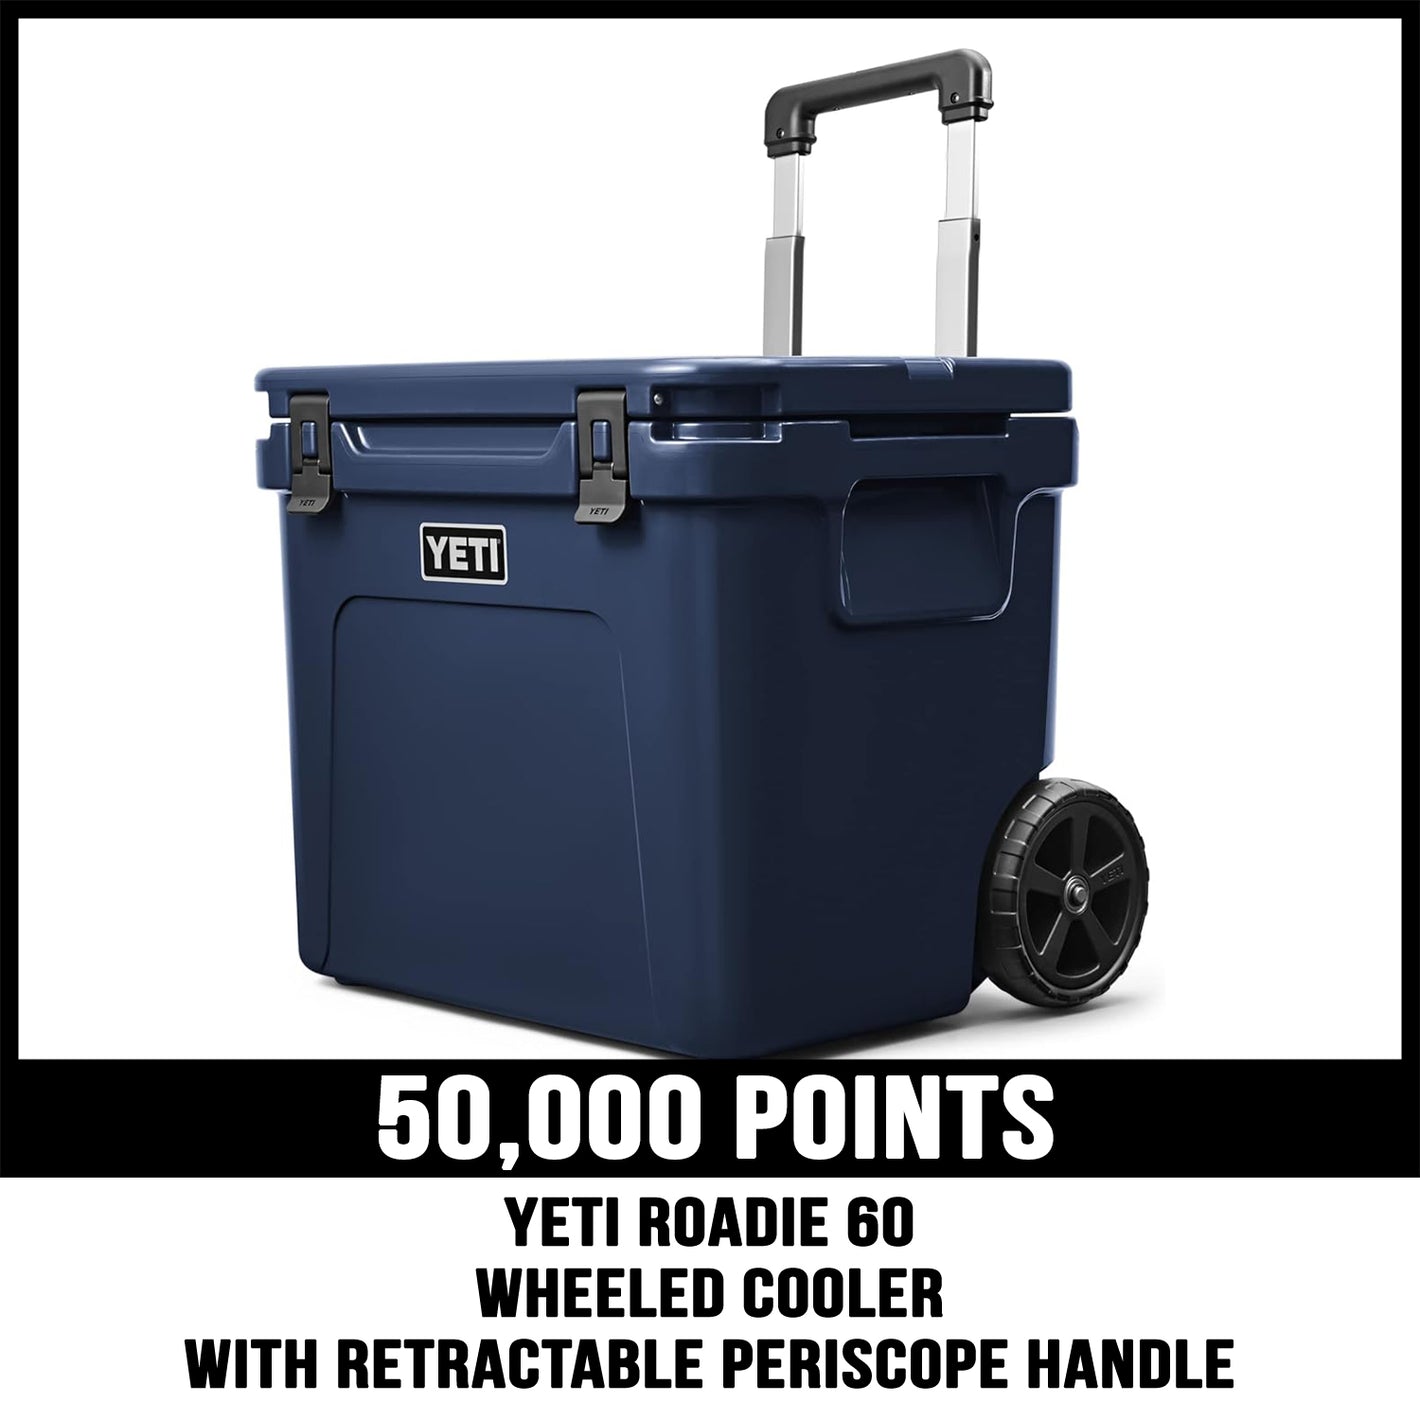 Yeti Roadie 60 cooler prize for 50000 points